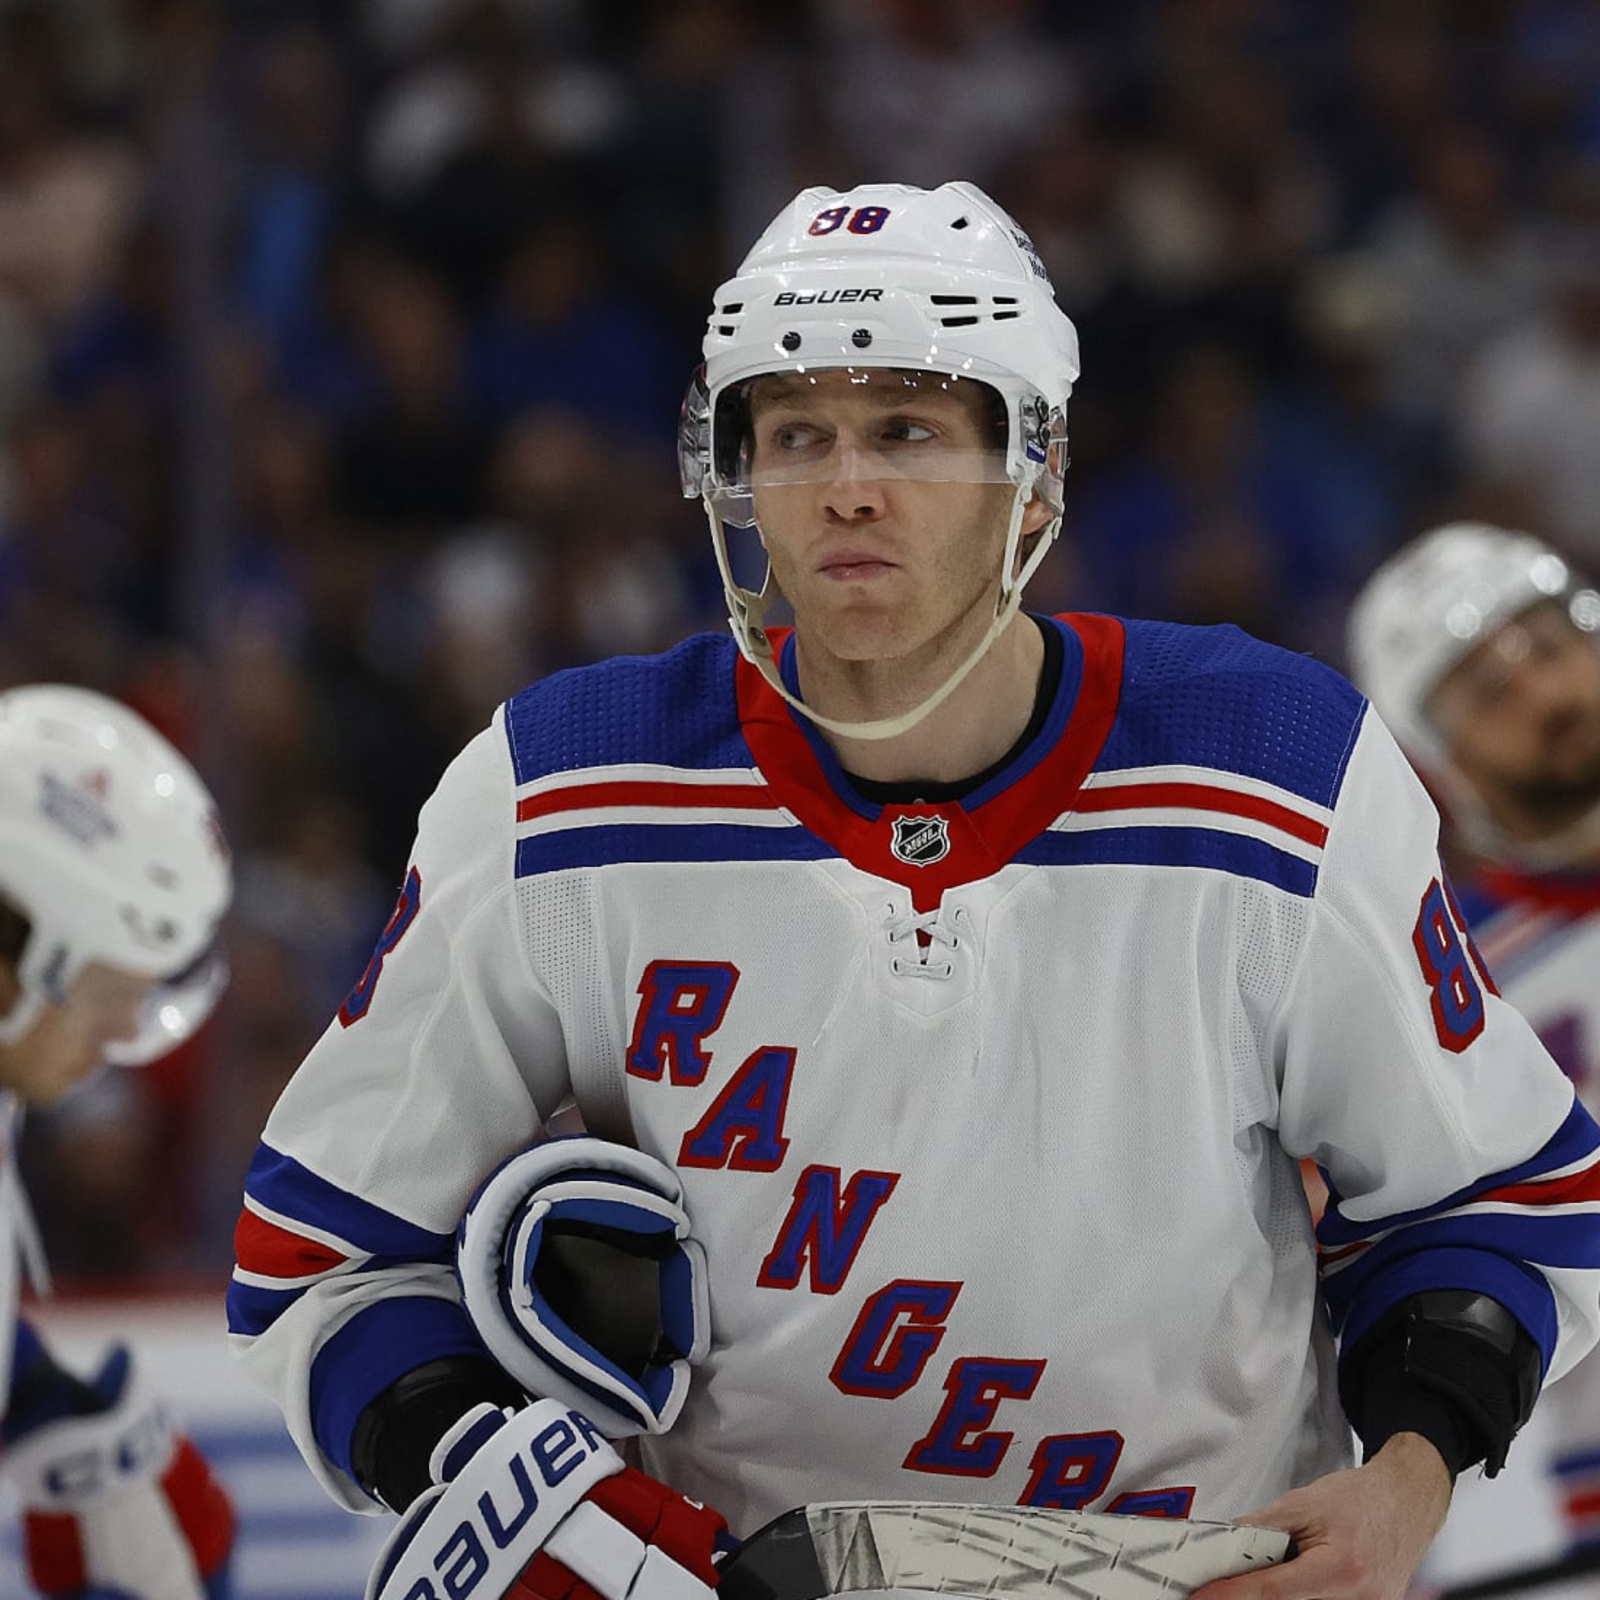 NHL Playoffs: Rangers? Flames? Who will win the Stanley Cup?